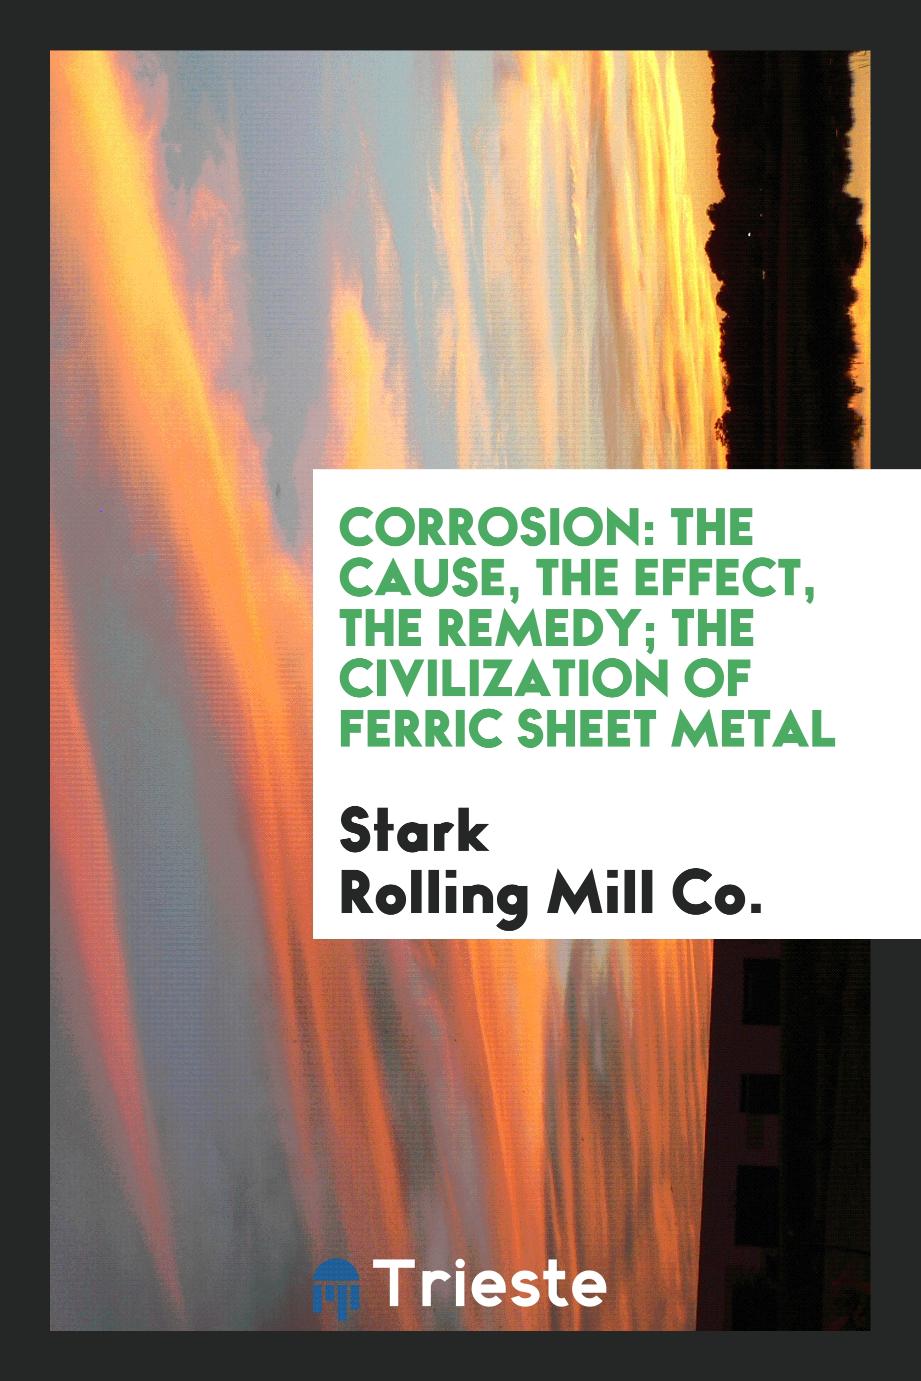 Corrosion: The Cause, the Effect, the Remedy; The Civilization of Ferric Sheet Metal